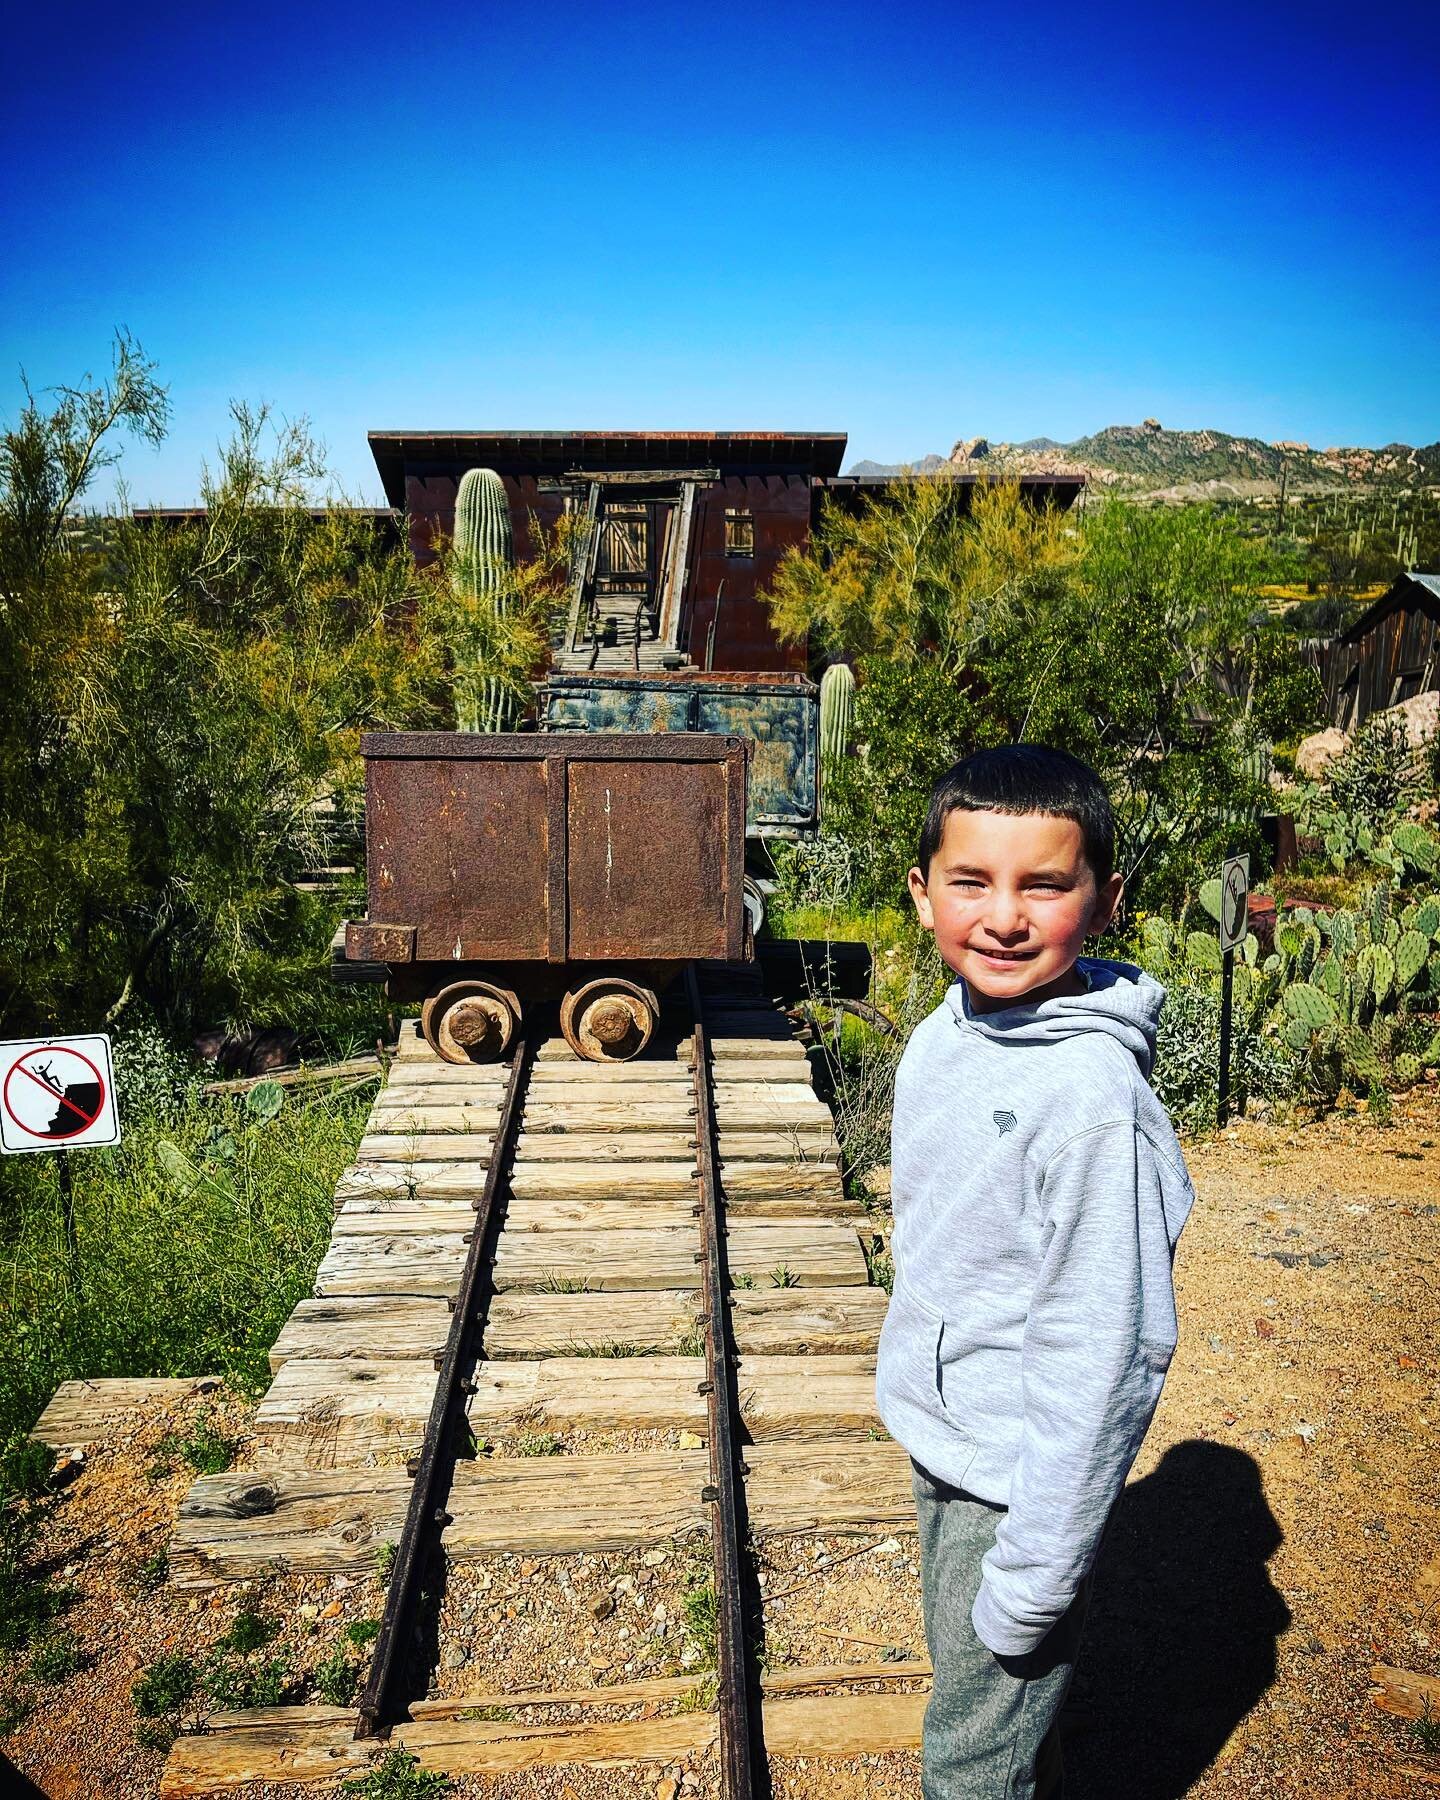 Jackson is looking good rocking The Nomans Original Logo Pullover Hoodie while traveling across the country #goldfieldghosttown 

Shop our merch 24/7 -  available on NomansMV.com #linkinbio 

#goldfield #arizona #ghosttown #merch #nomansmv #travel #t